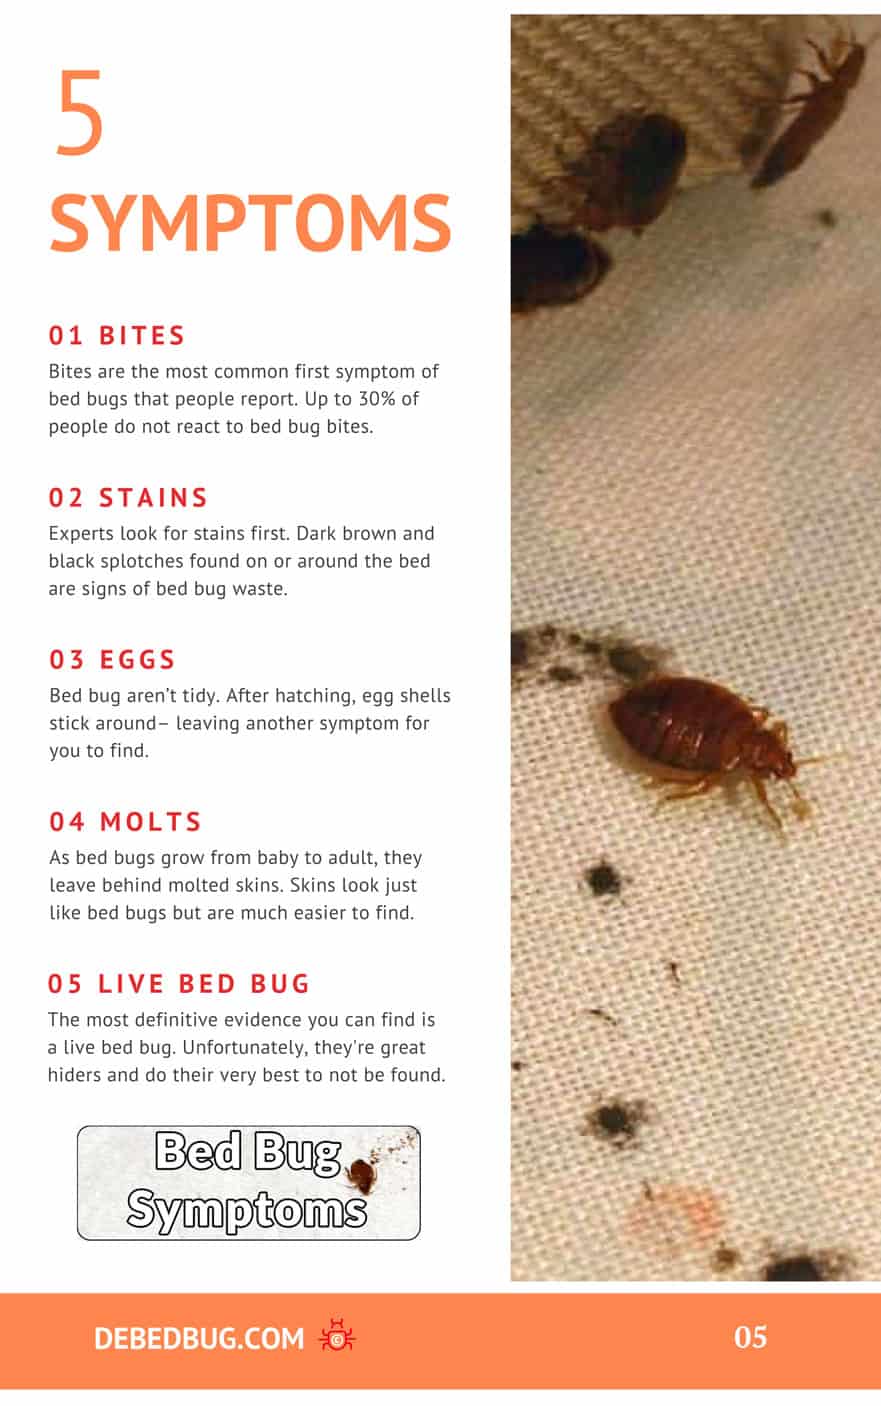 The Signs Of Bed Bug Activity